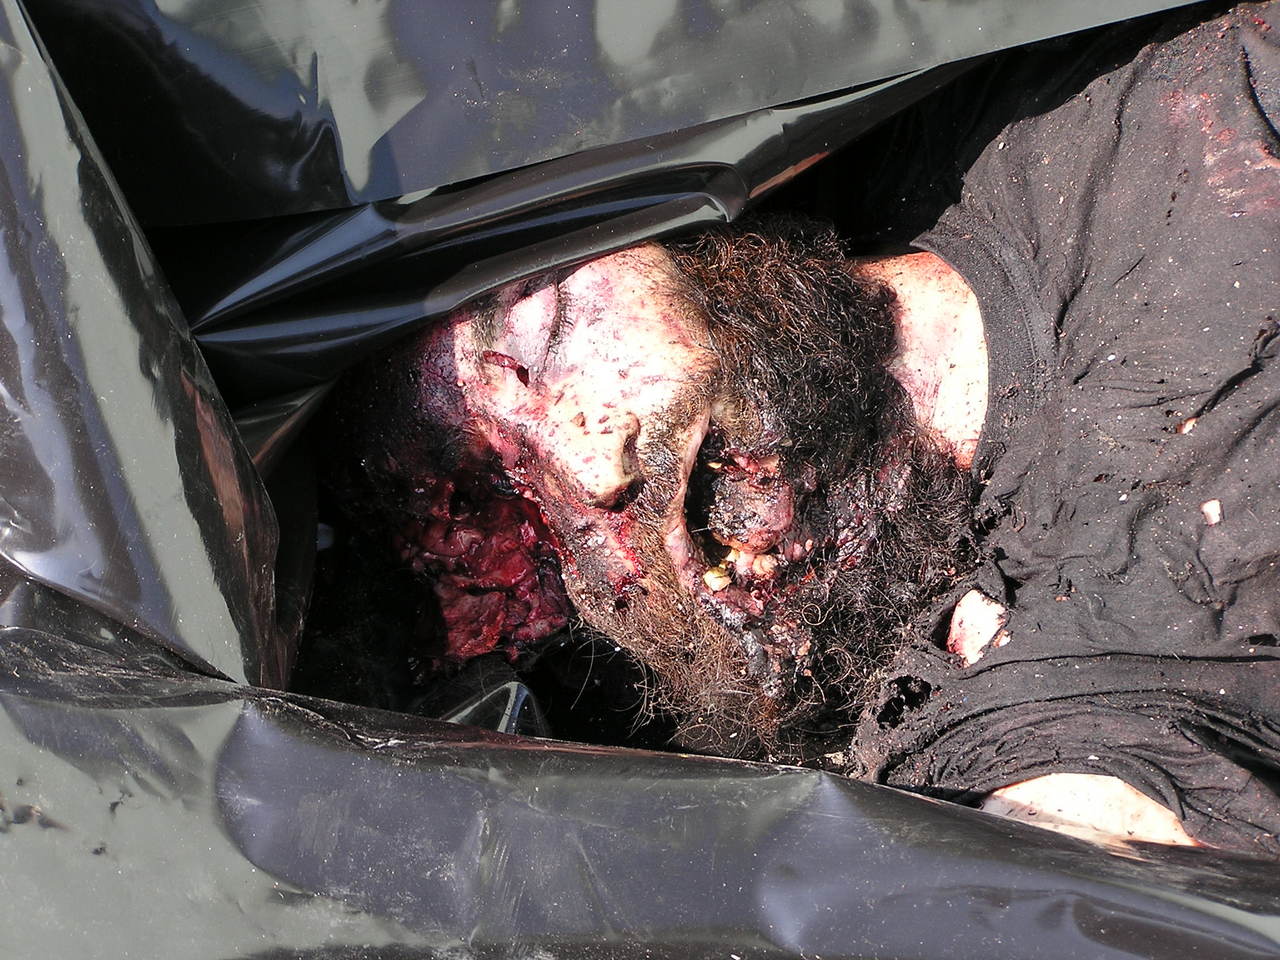 Beslan. The body of a terrorist. Turned the face